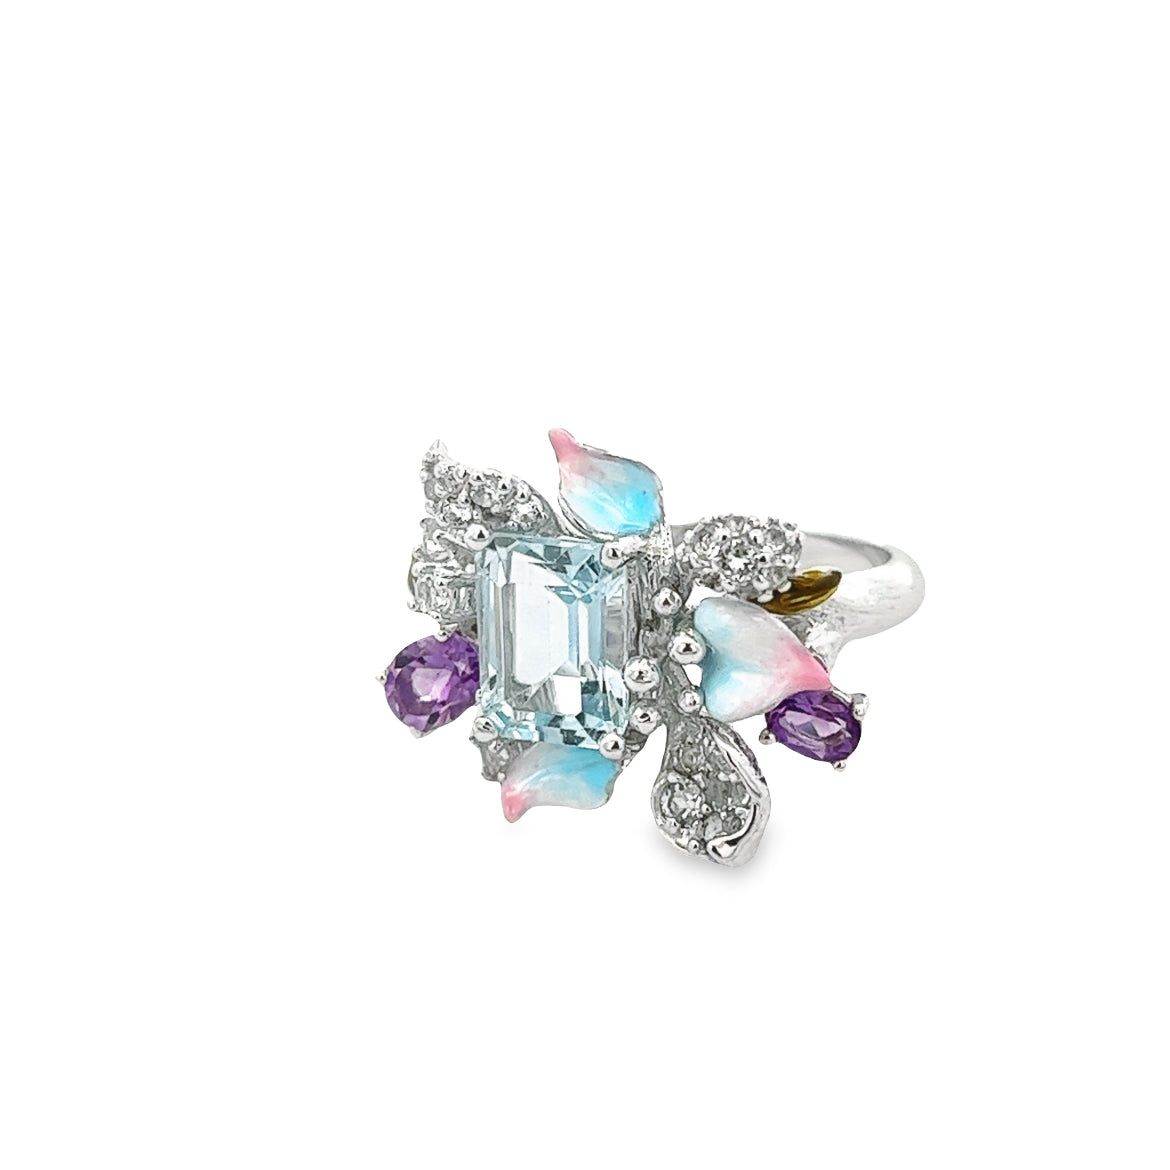 925 SILVER PLATED RING WITH BLUE TOPAZ, AMETHYST AND WHITE TOPAZ